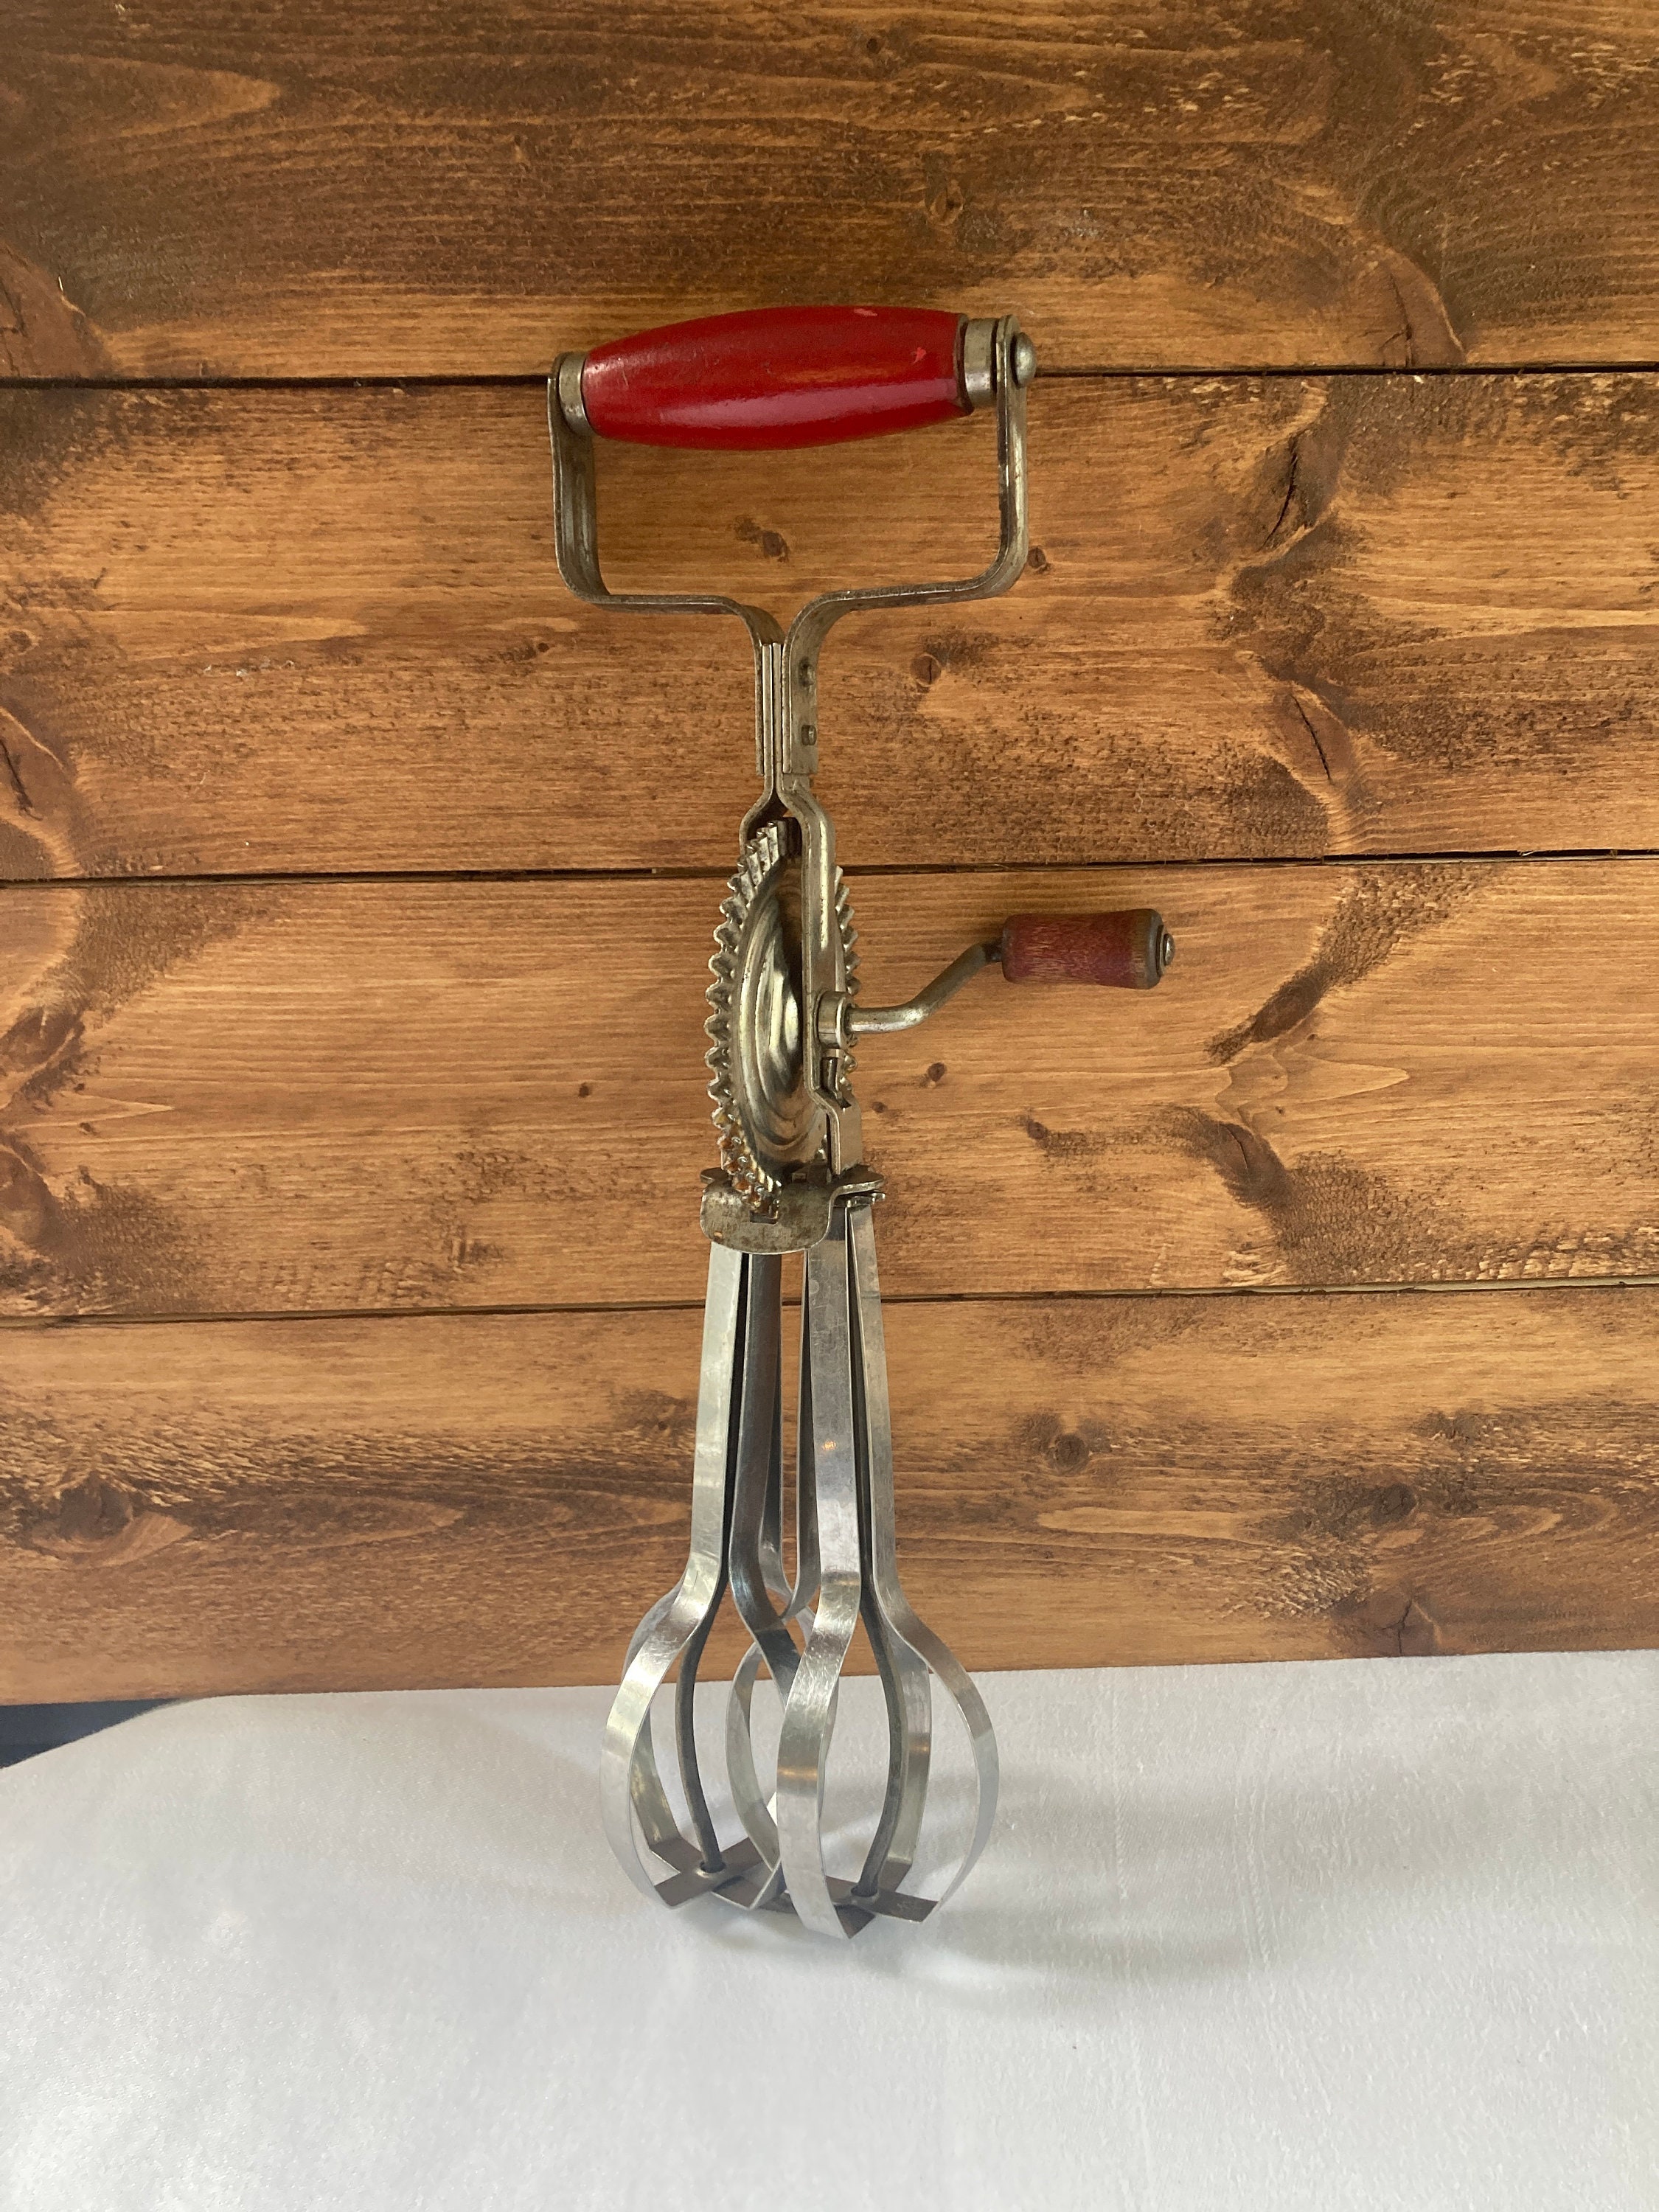 Vintage Androck Egg Beater Manual Hand Mixer Red Wooden Handles